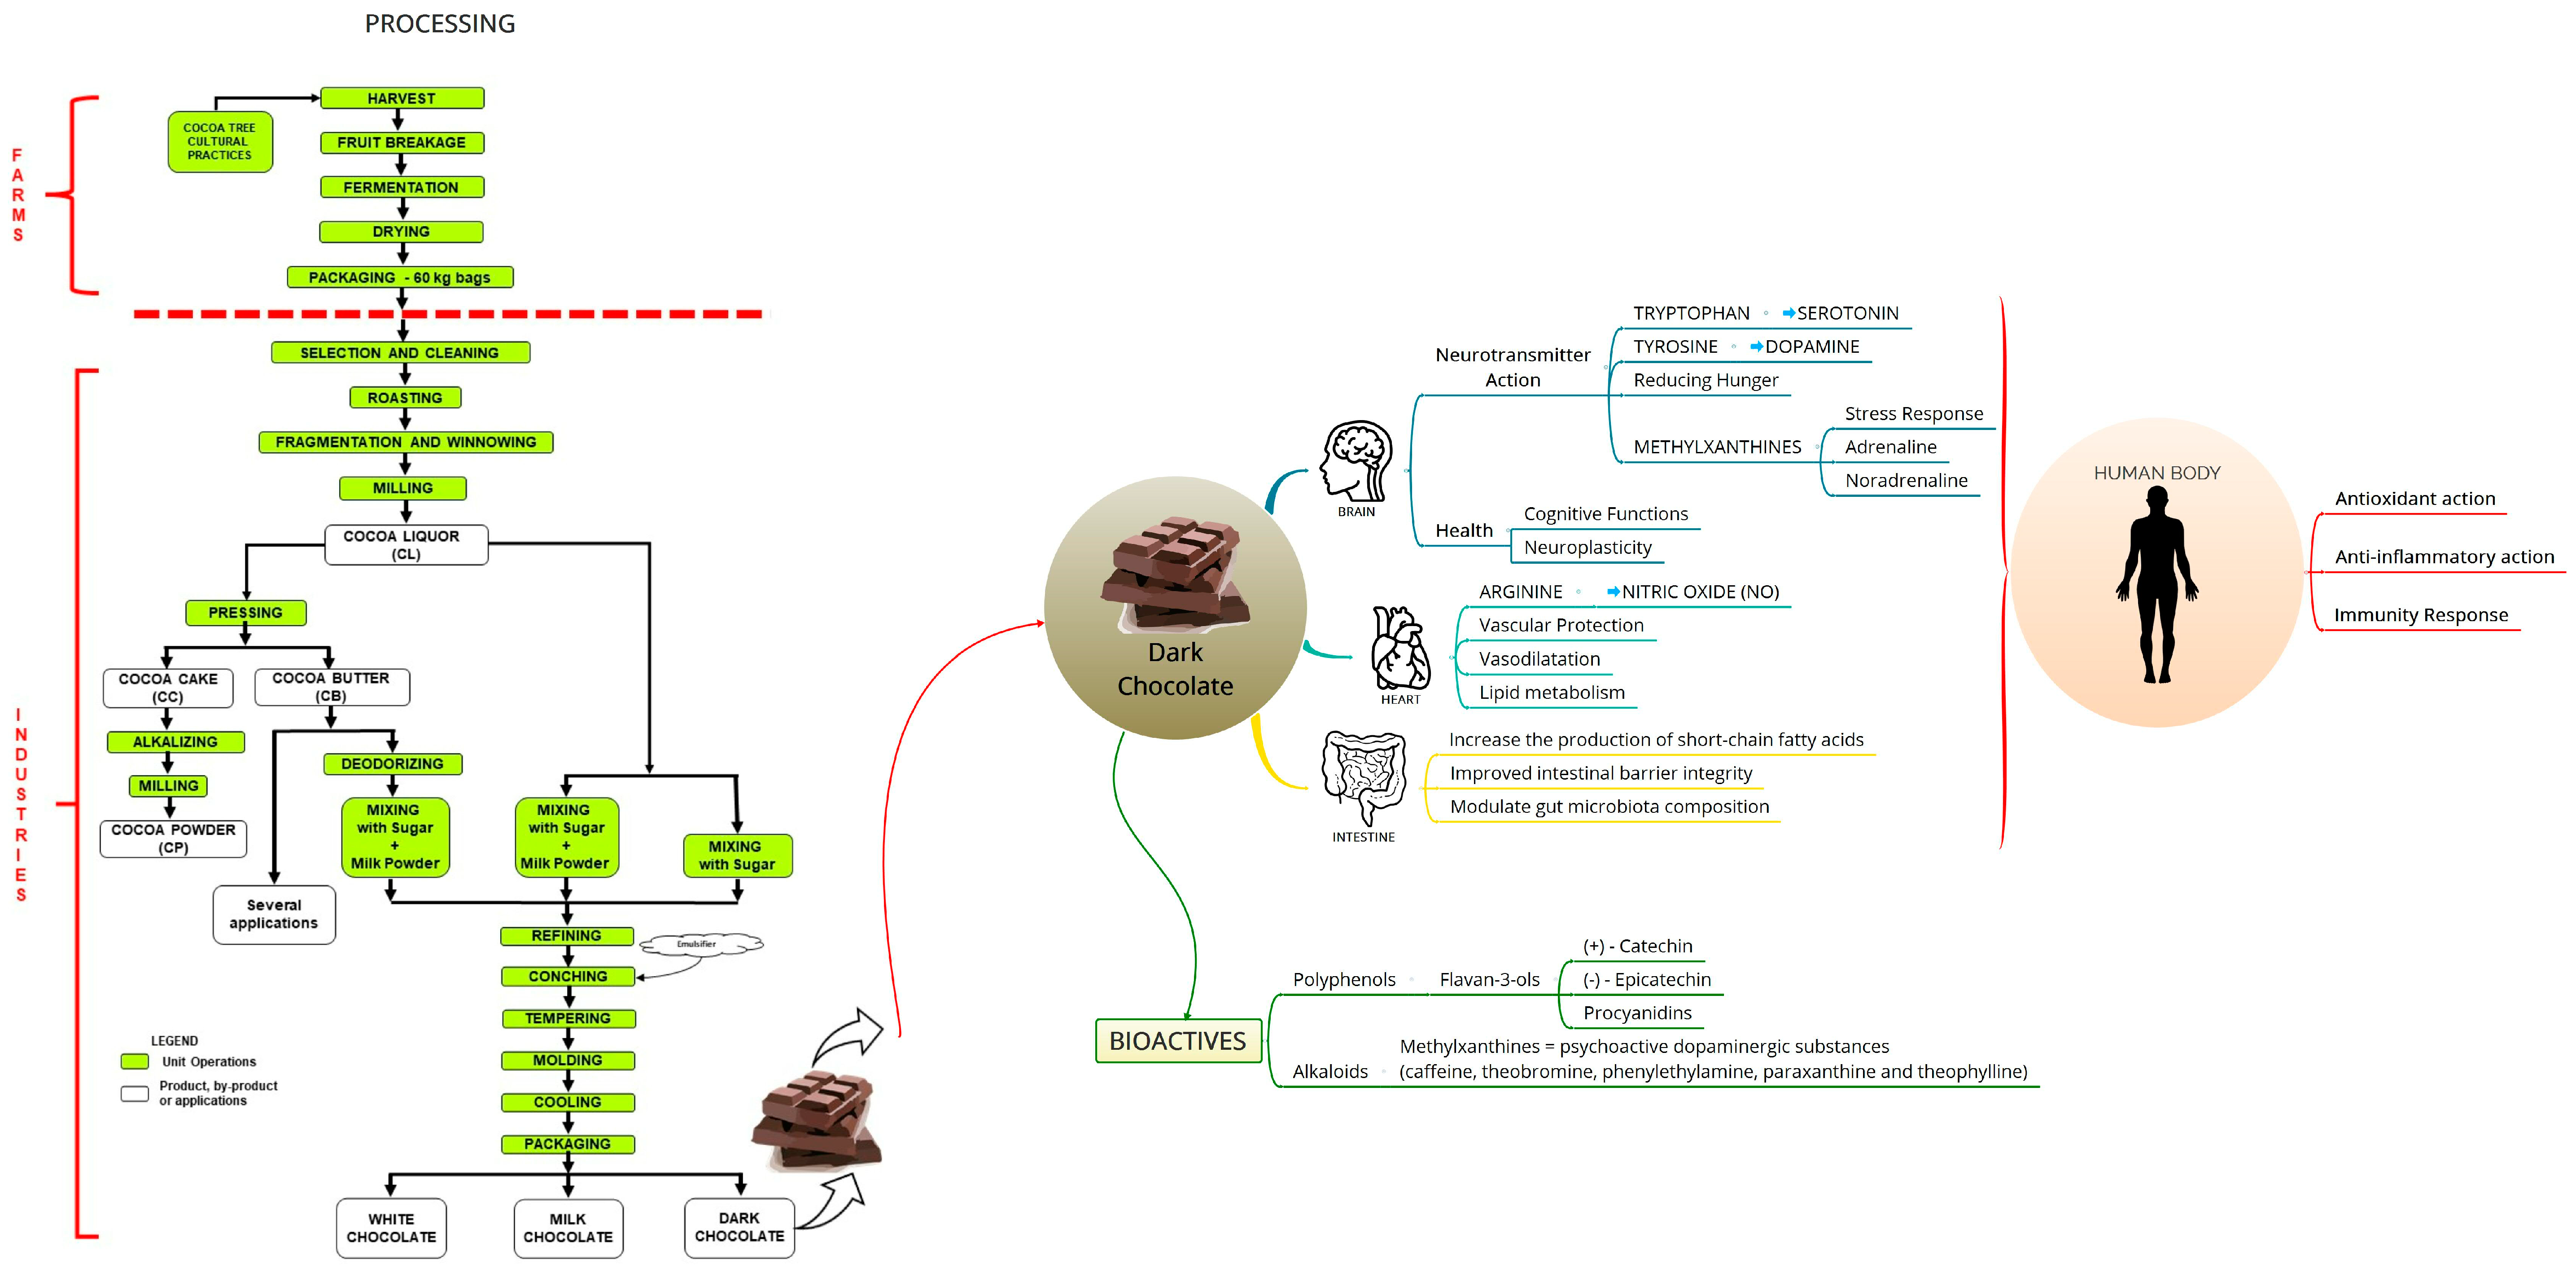 Chocolate processing, bioactive compounds and effects on human nutrition